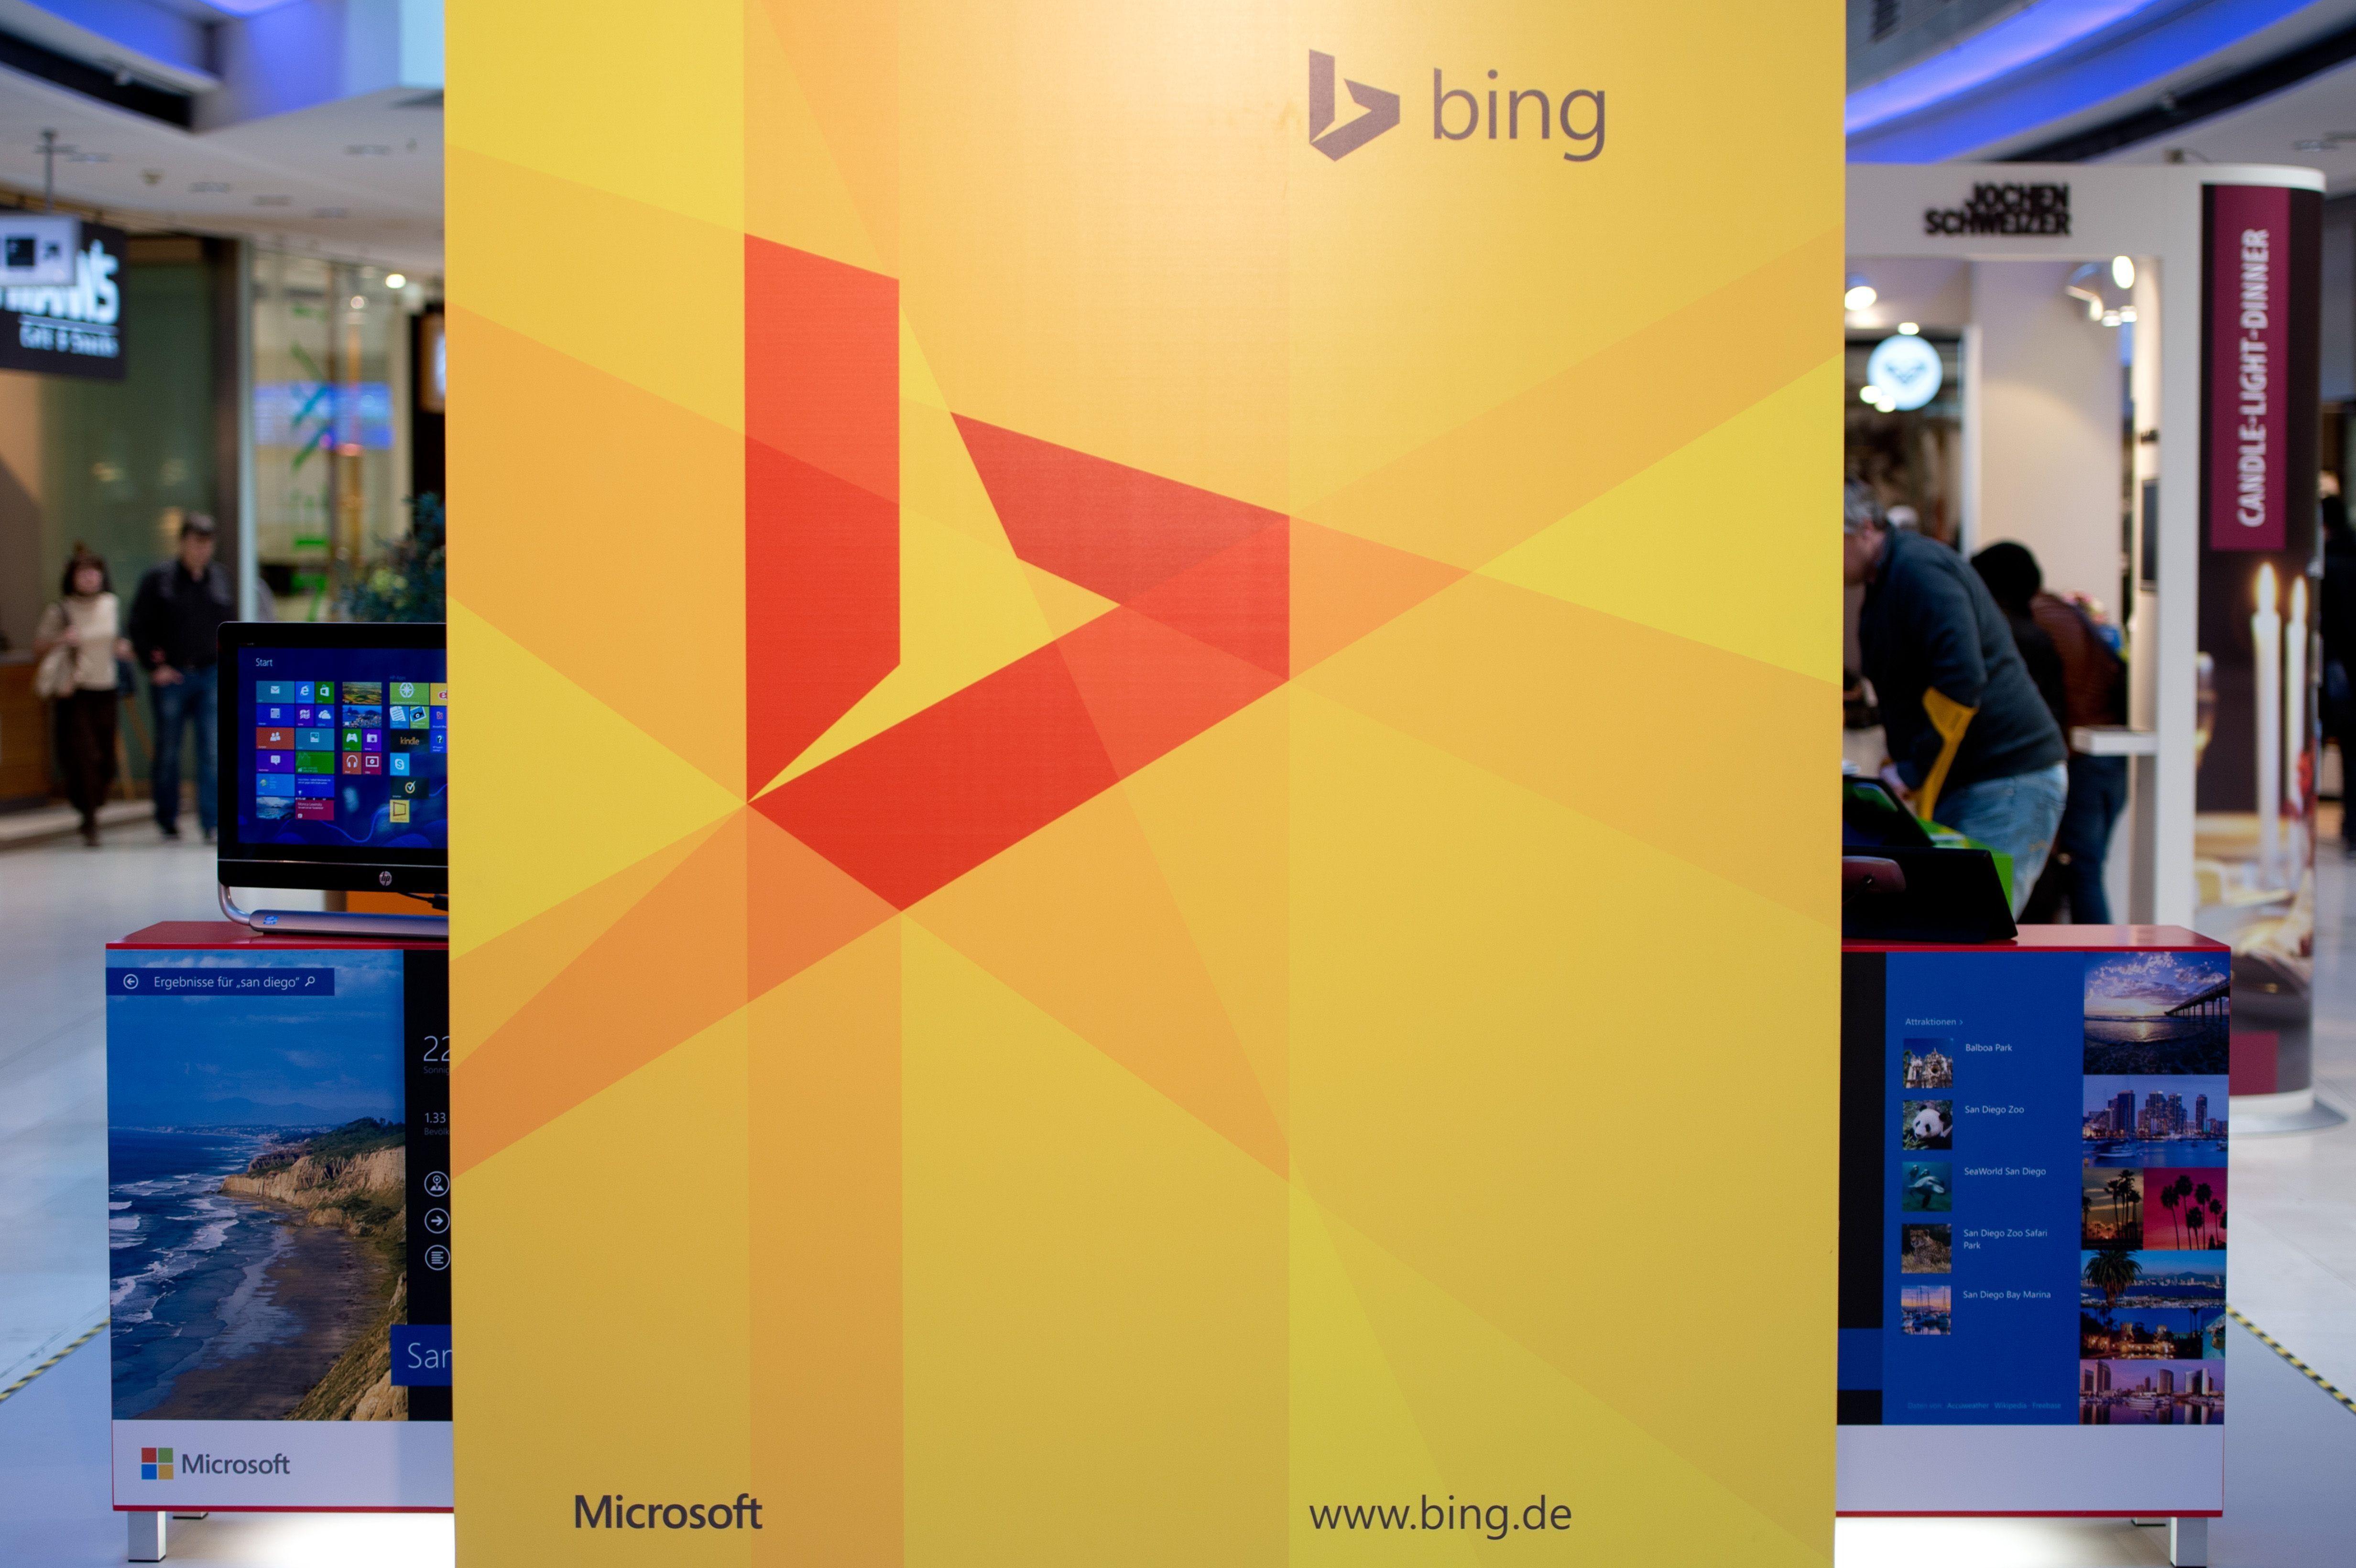 Bing Search Logo - Microsoft's Bing Search Engine Is Finally Proiftable | Time